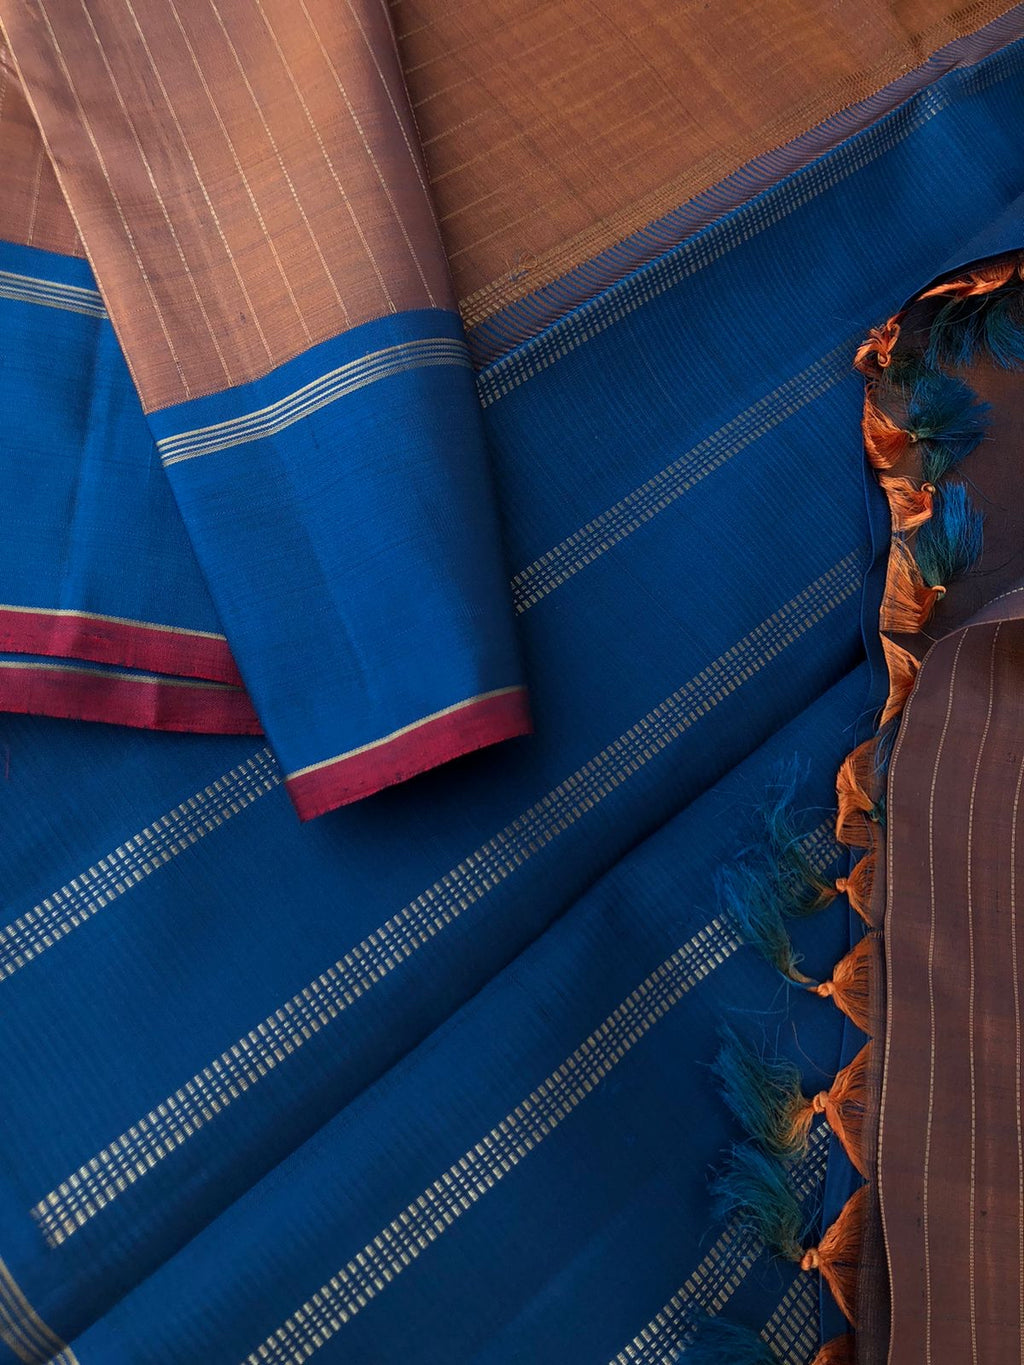 Heriyae - Heirloom Kanchivarams - caramel brown dual tone body with burnt blue pallu and blouse with vertical muthu stripes woven body